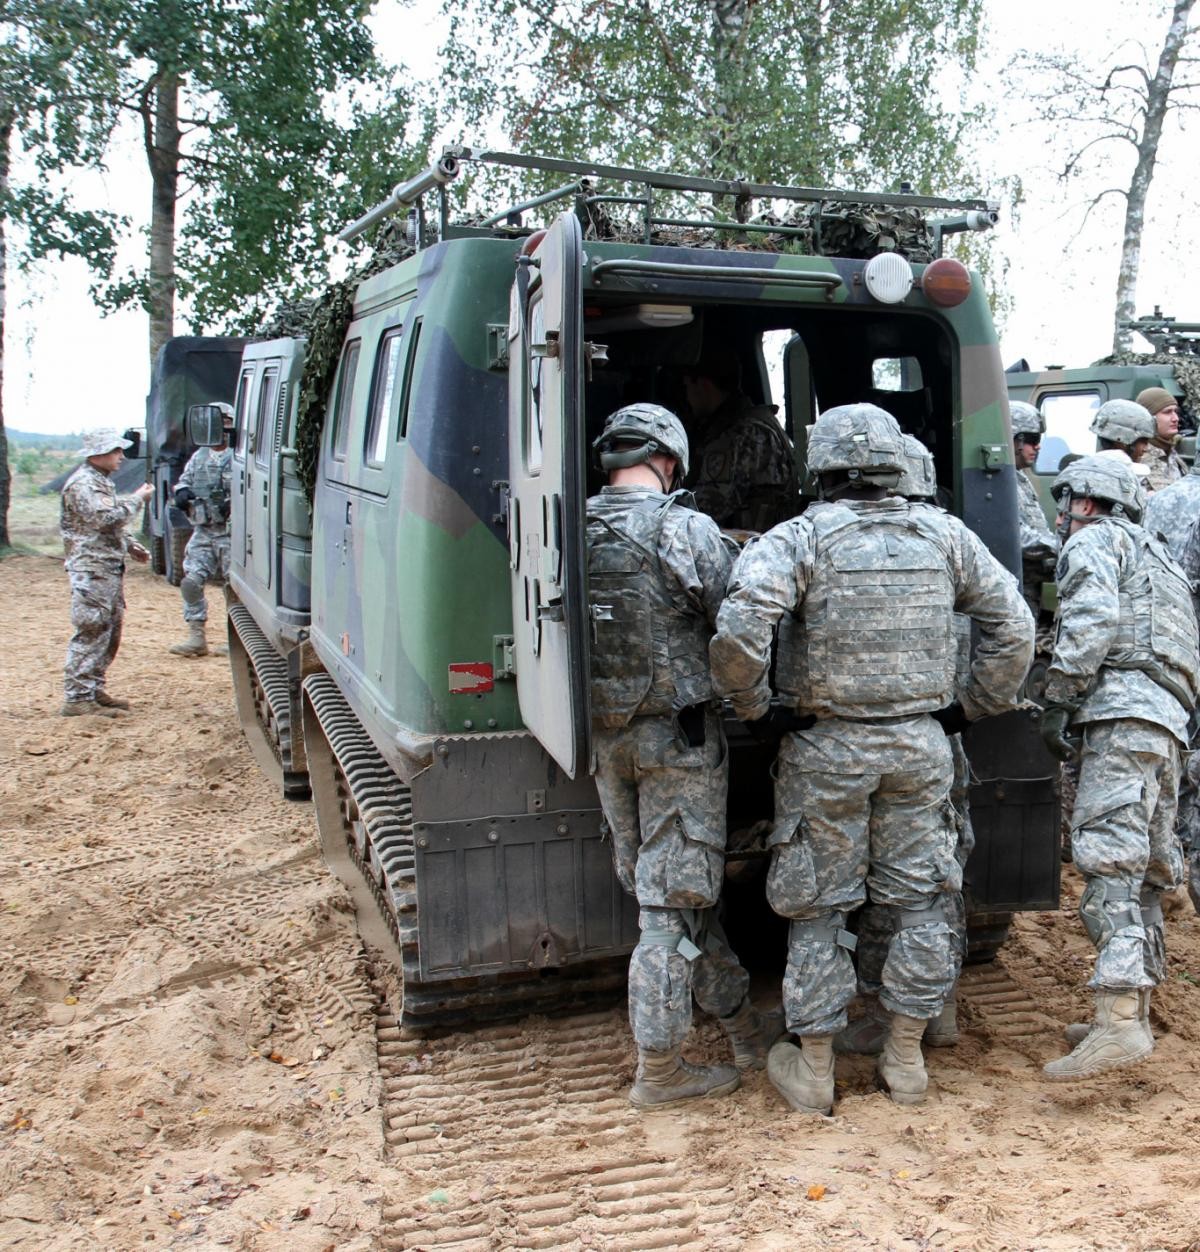 173rd Airborne Brigade 'shows off' equipment to the Latvian Land Force